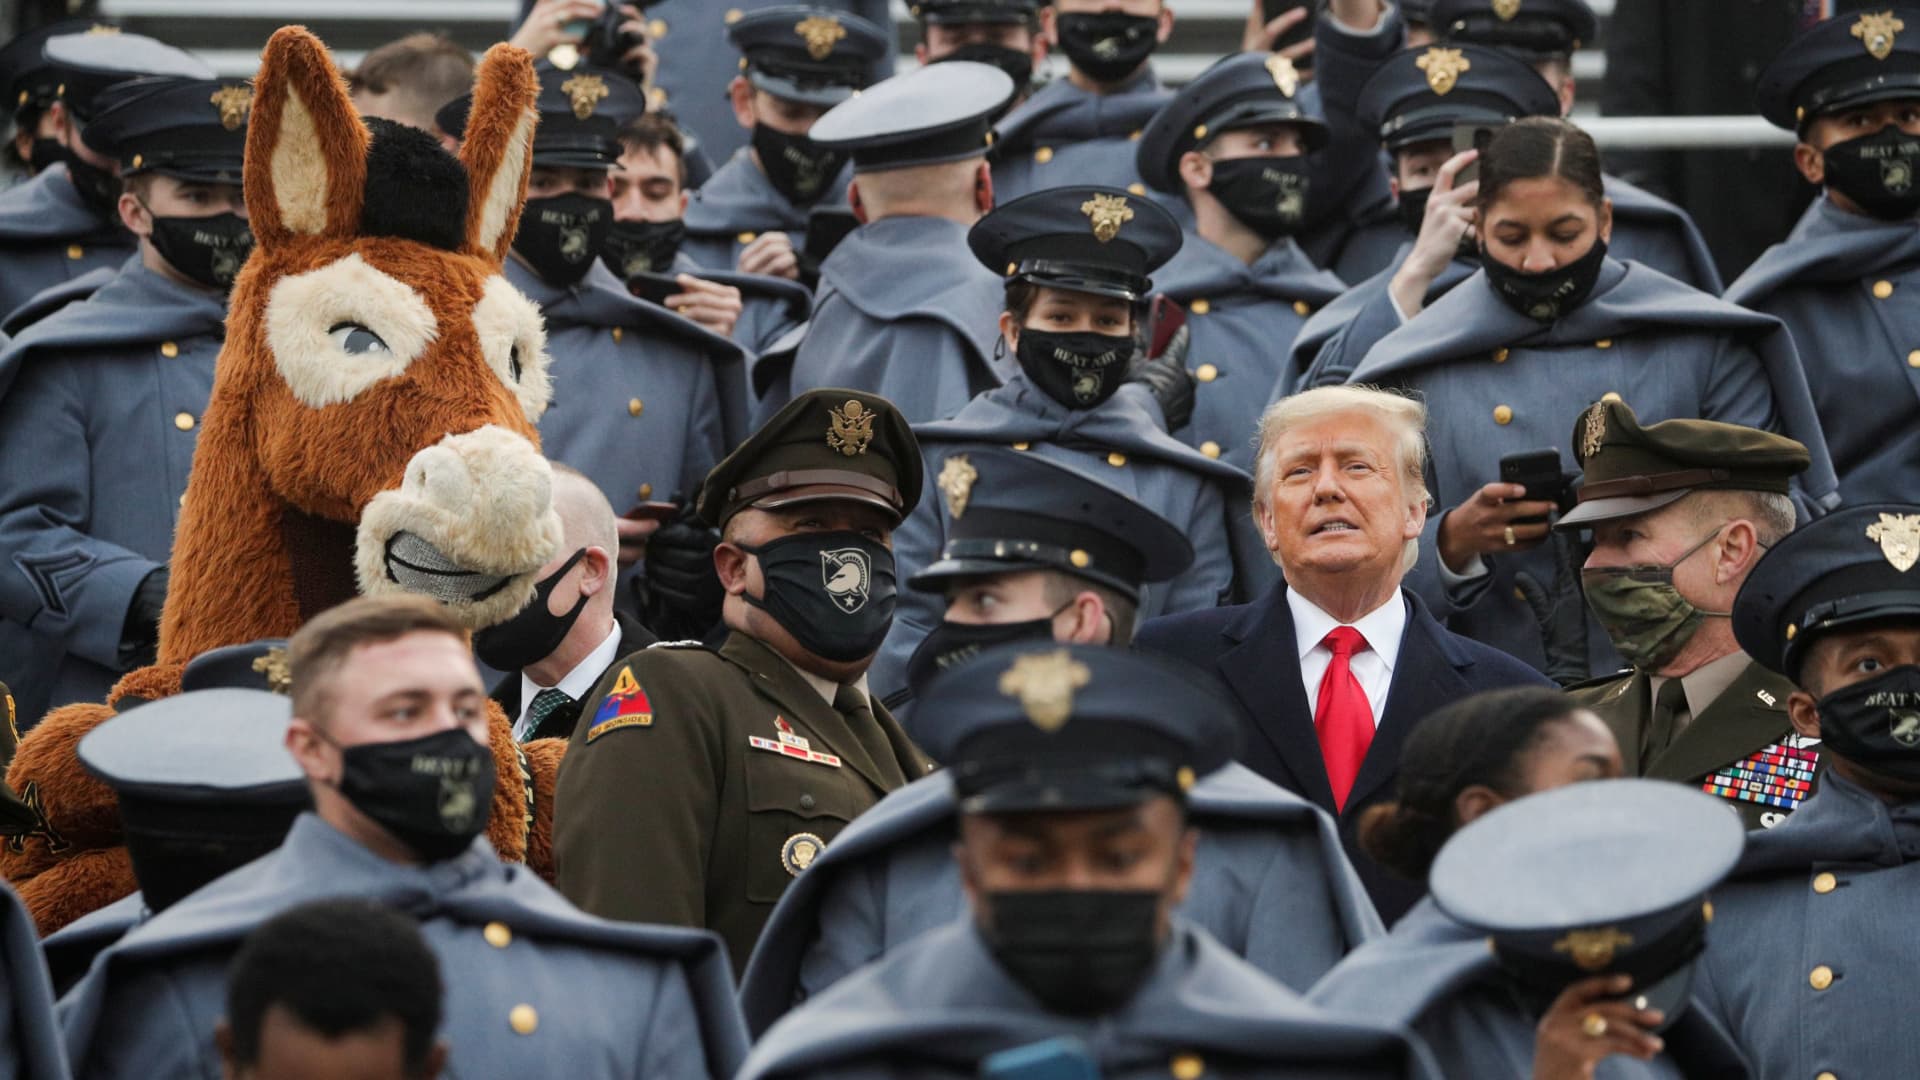 U.S. President Trump stands among U.S. Army cadets as he attends the annual Army-Navy collegiate football game at Michie Stadium, in West Point, New York, U.S., December 12, 2020.